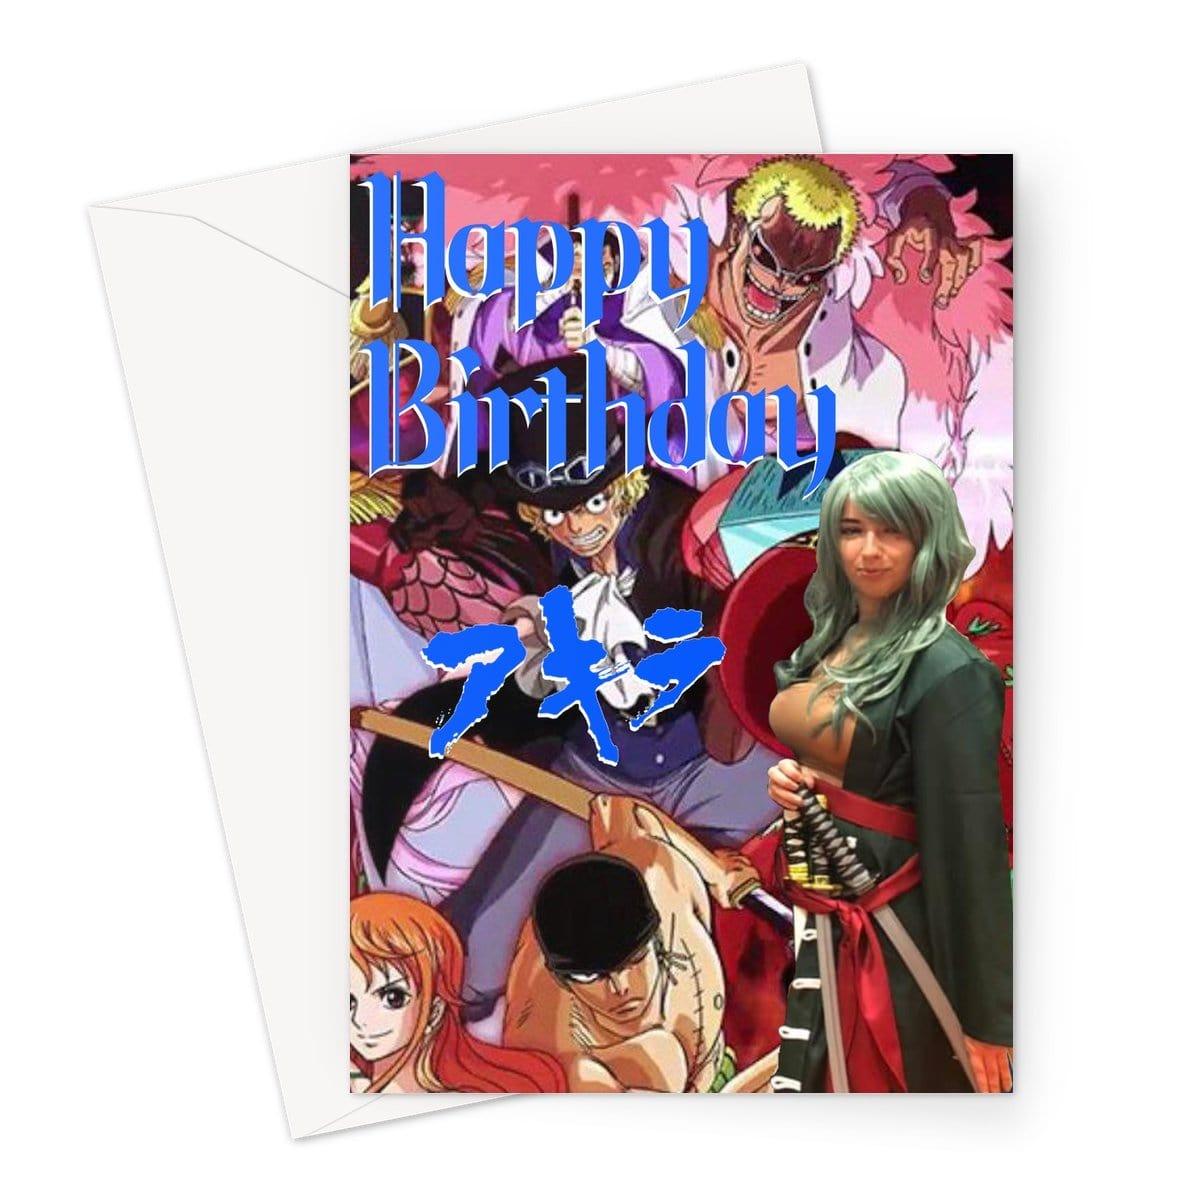 A Twisted Gifts Akira Greeting Card featuring anime characters to celebrate a birthday.